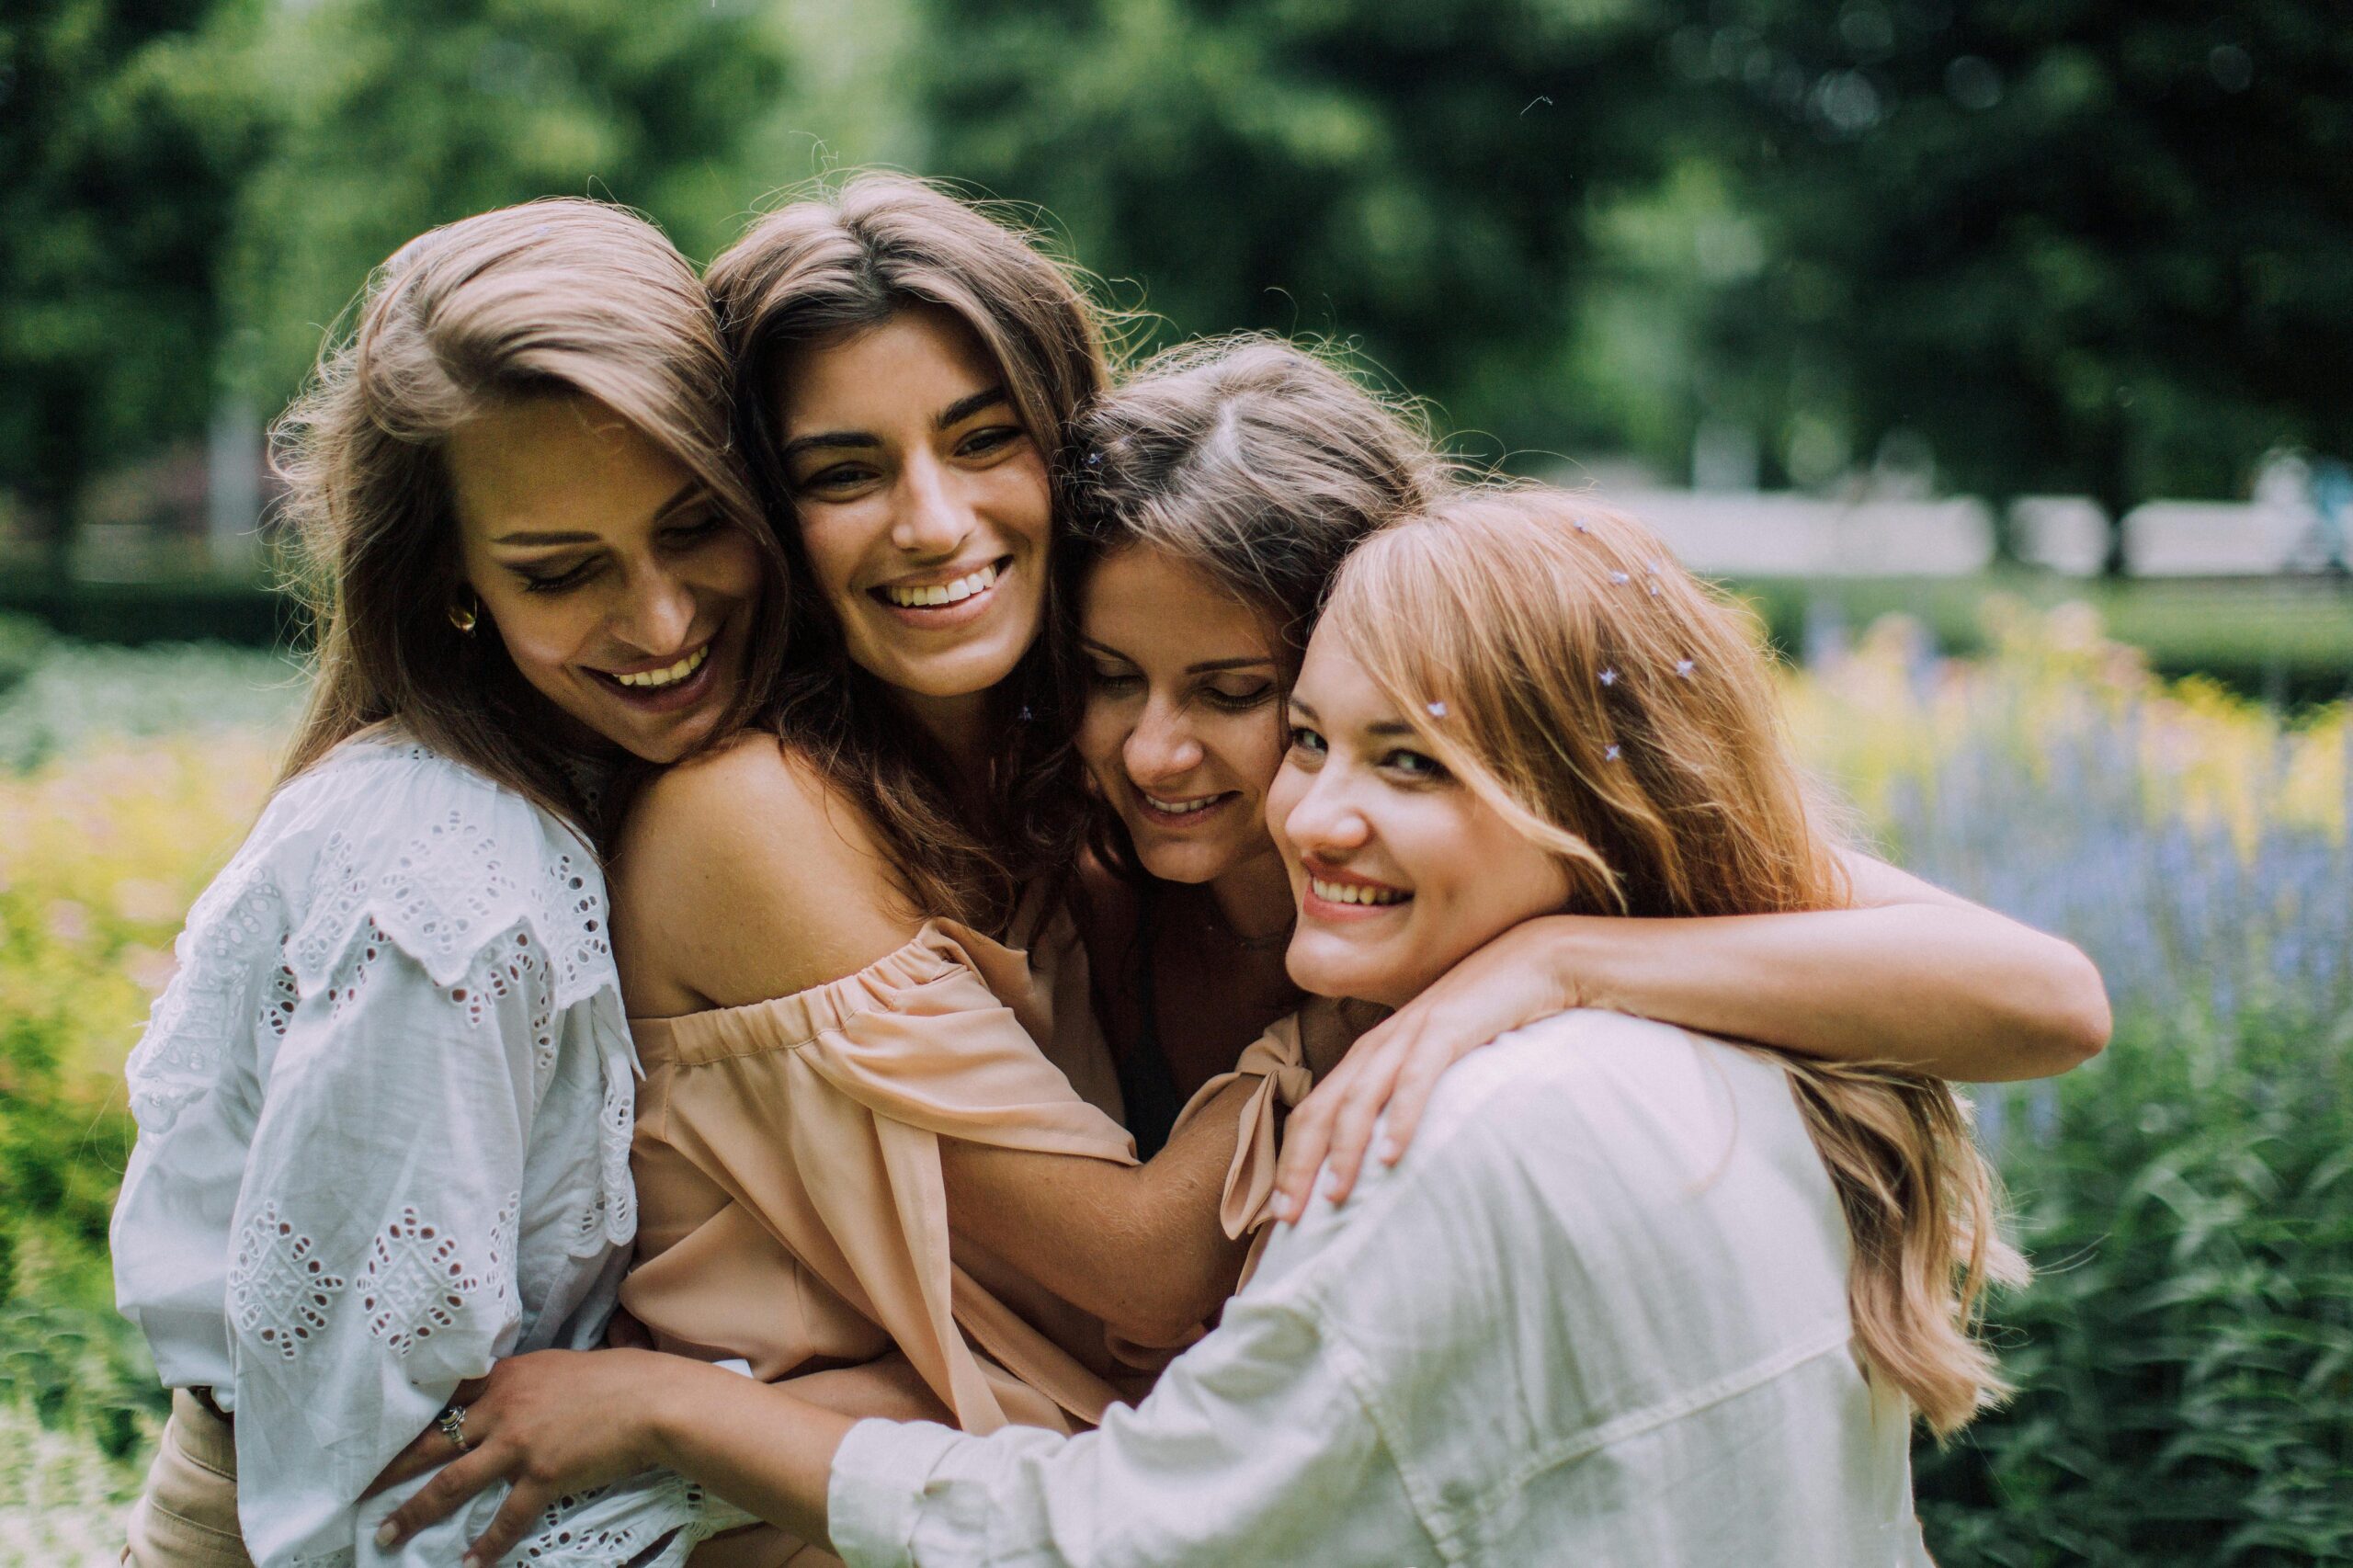 group of women embracing